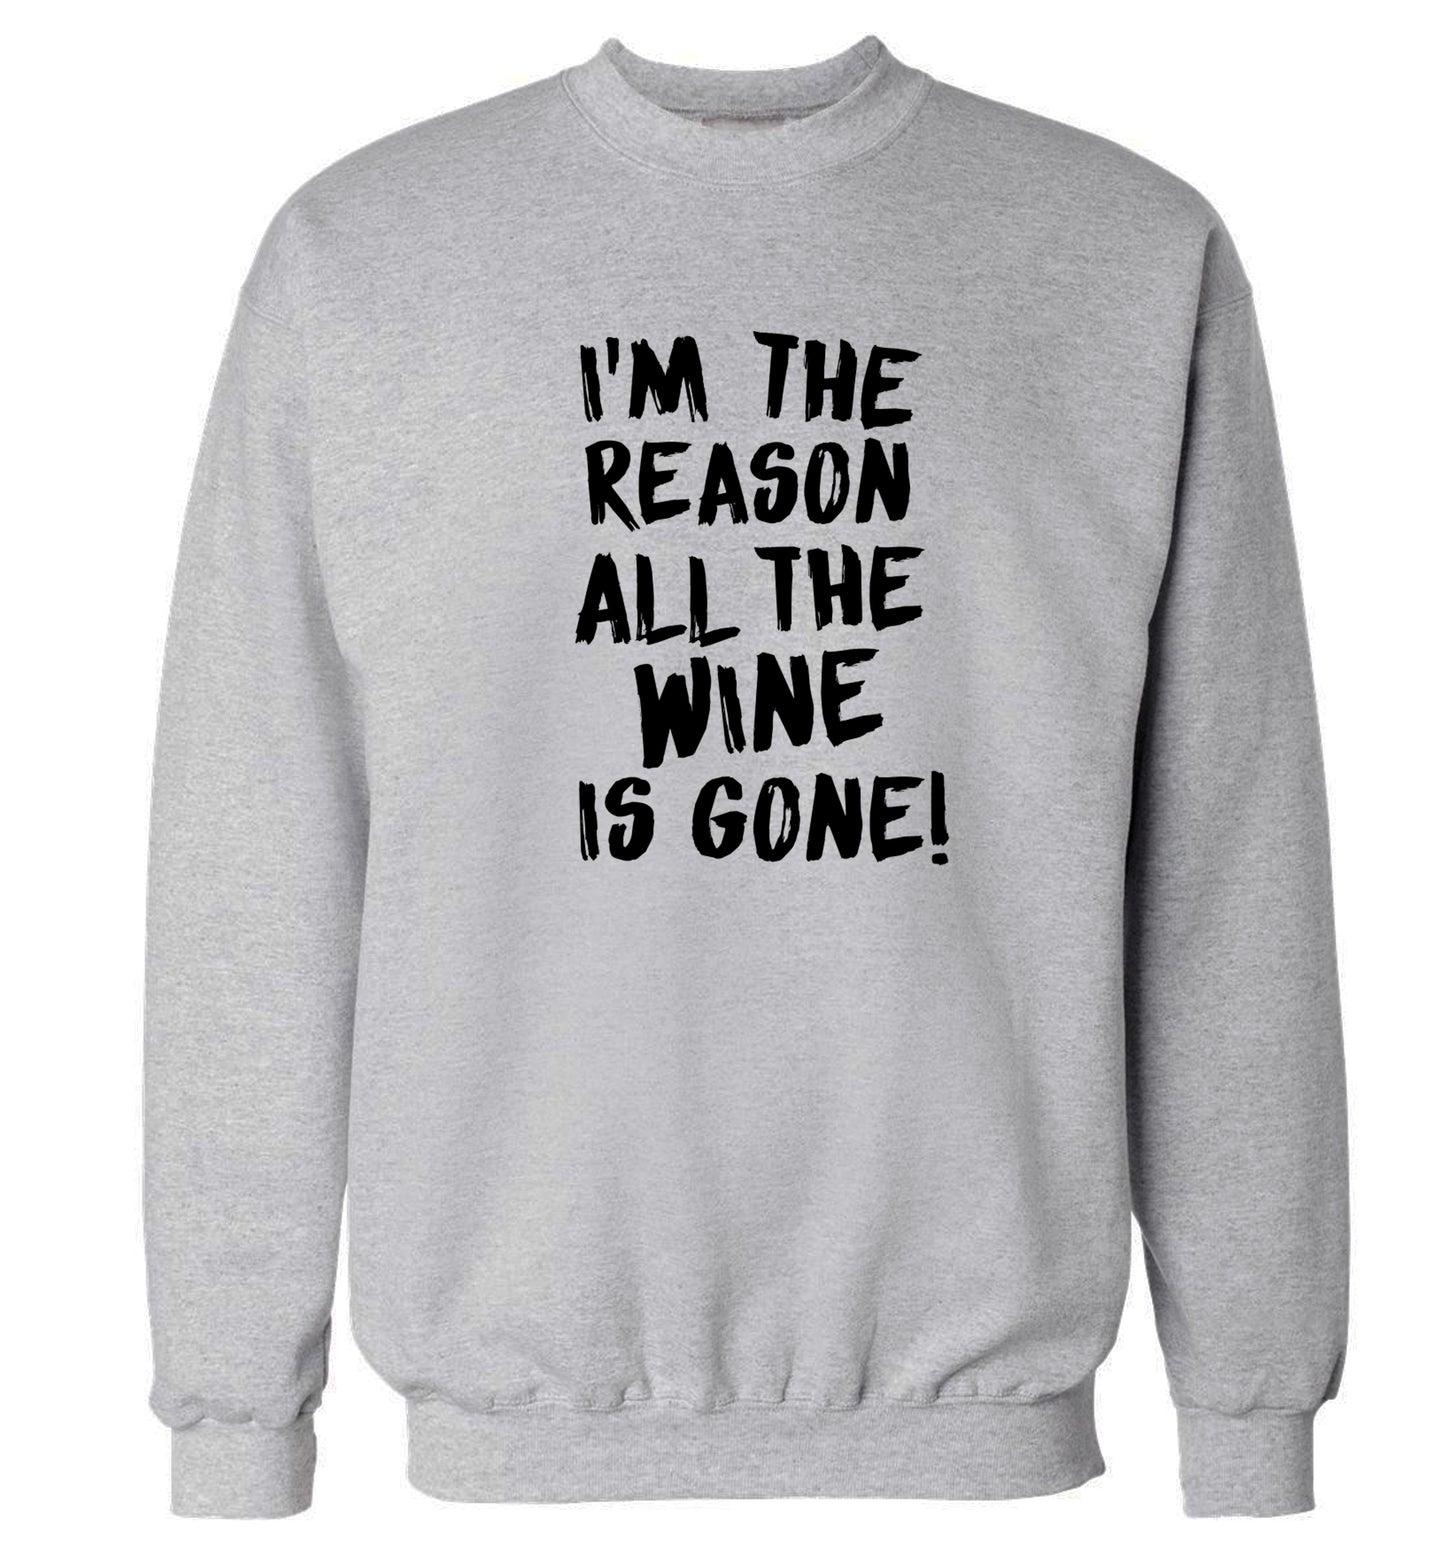 I'm the reason all the wine is gone Adult's unisex grey Sweater 2XL